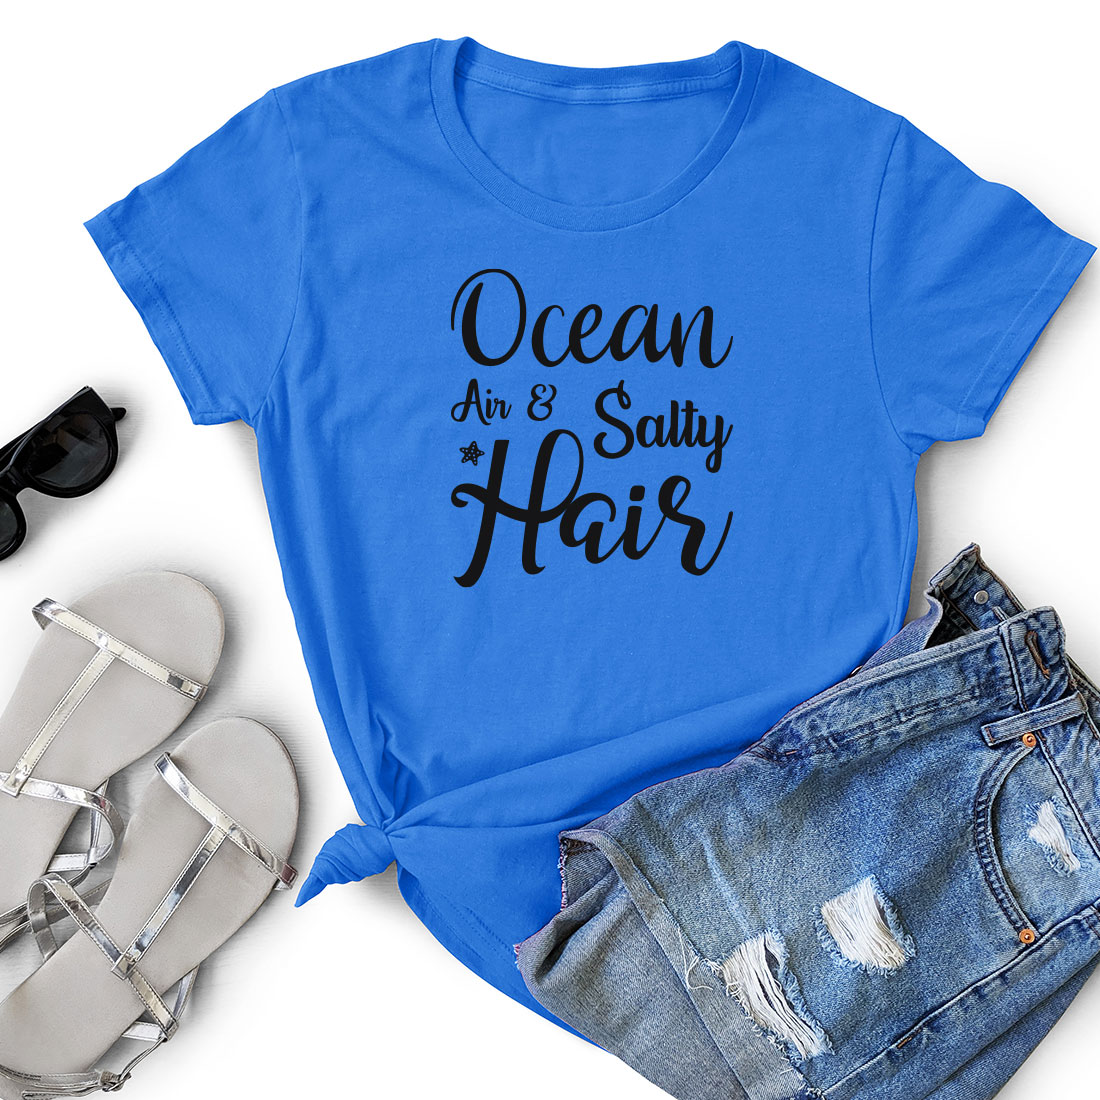 T - shirt that says ocean and salty hair next to a pair of shorts.